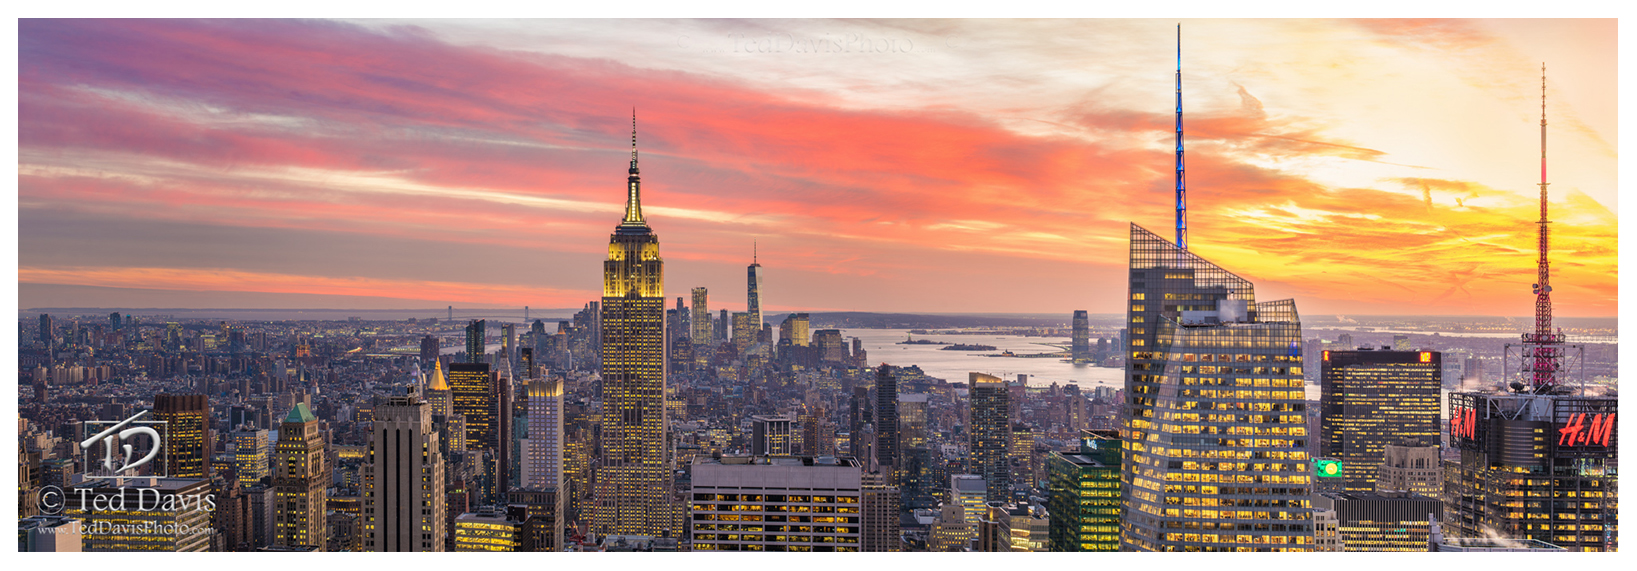 New York, Top of the Rock, Rockefeller, NYC, Central Park, East, Long Island, twinkle, Queens, Brooklyn, Hudson, Liberty, Statute